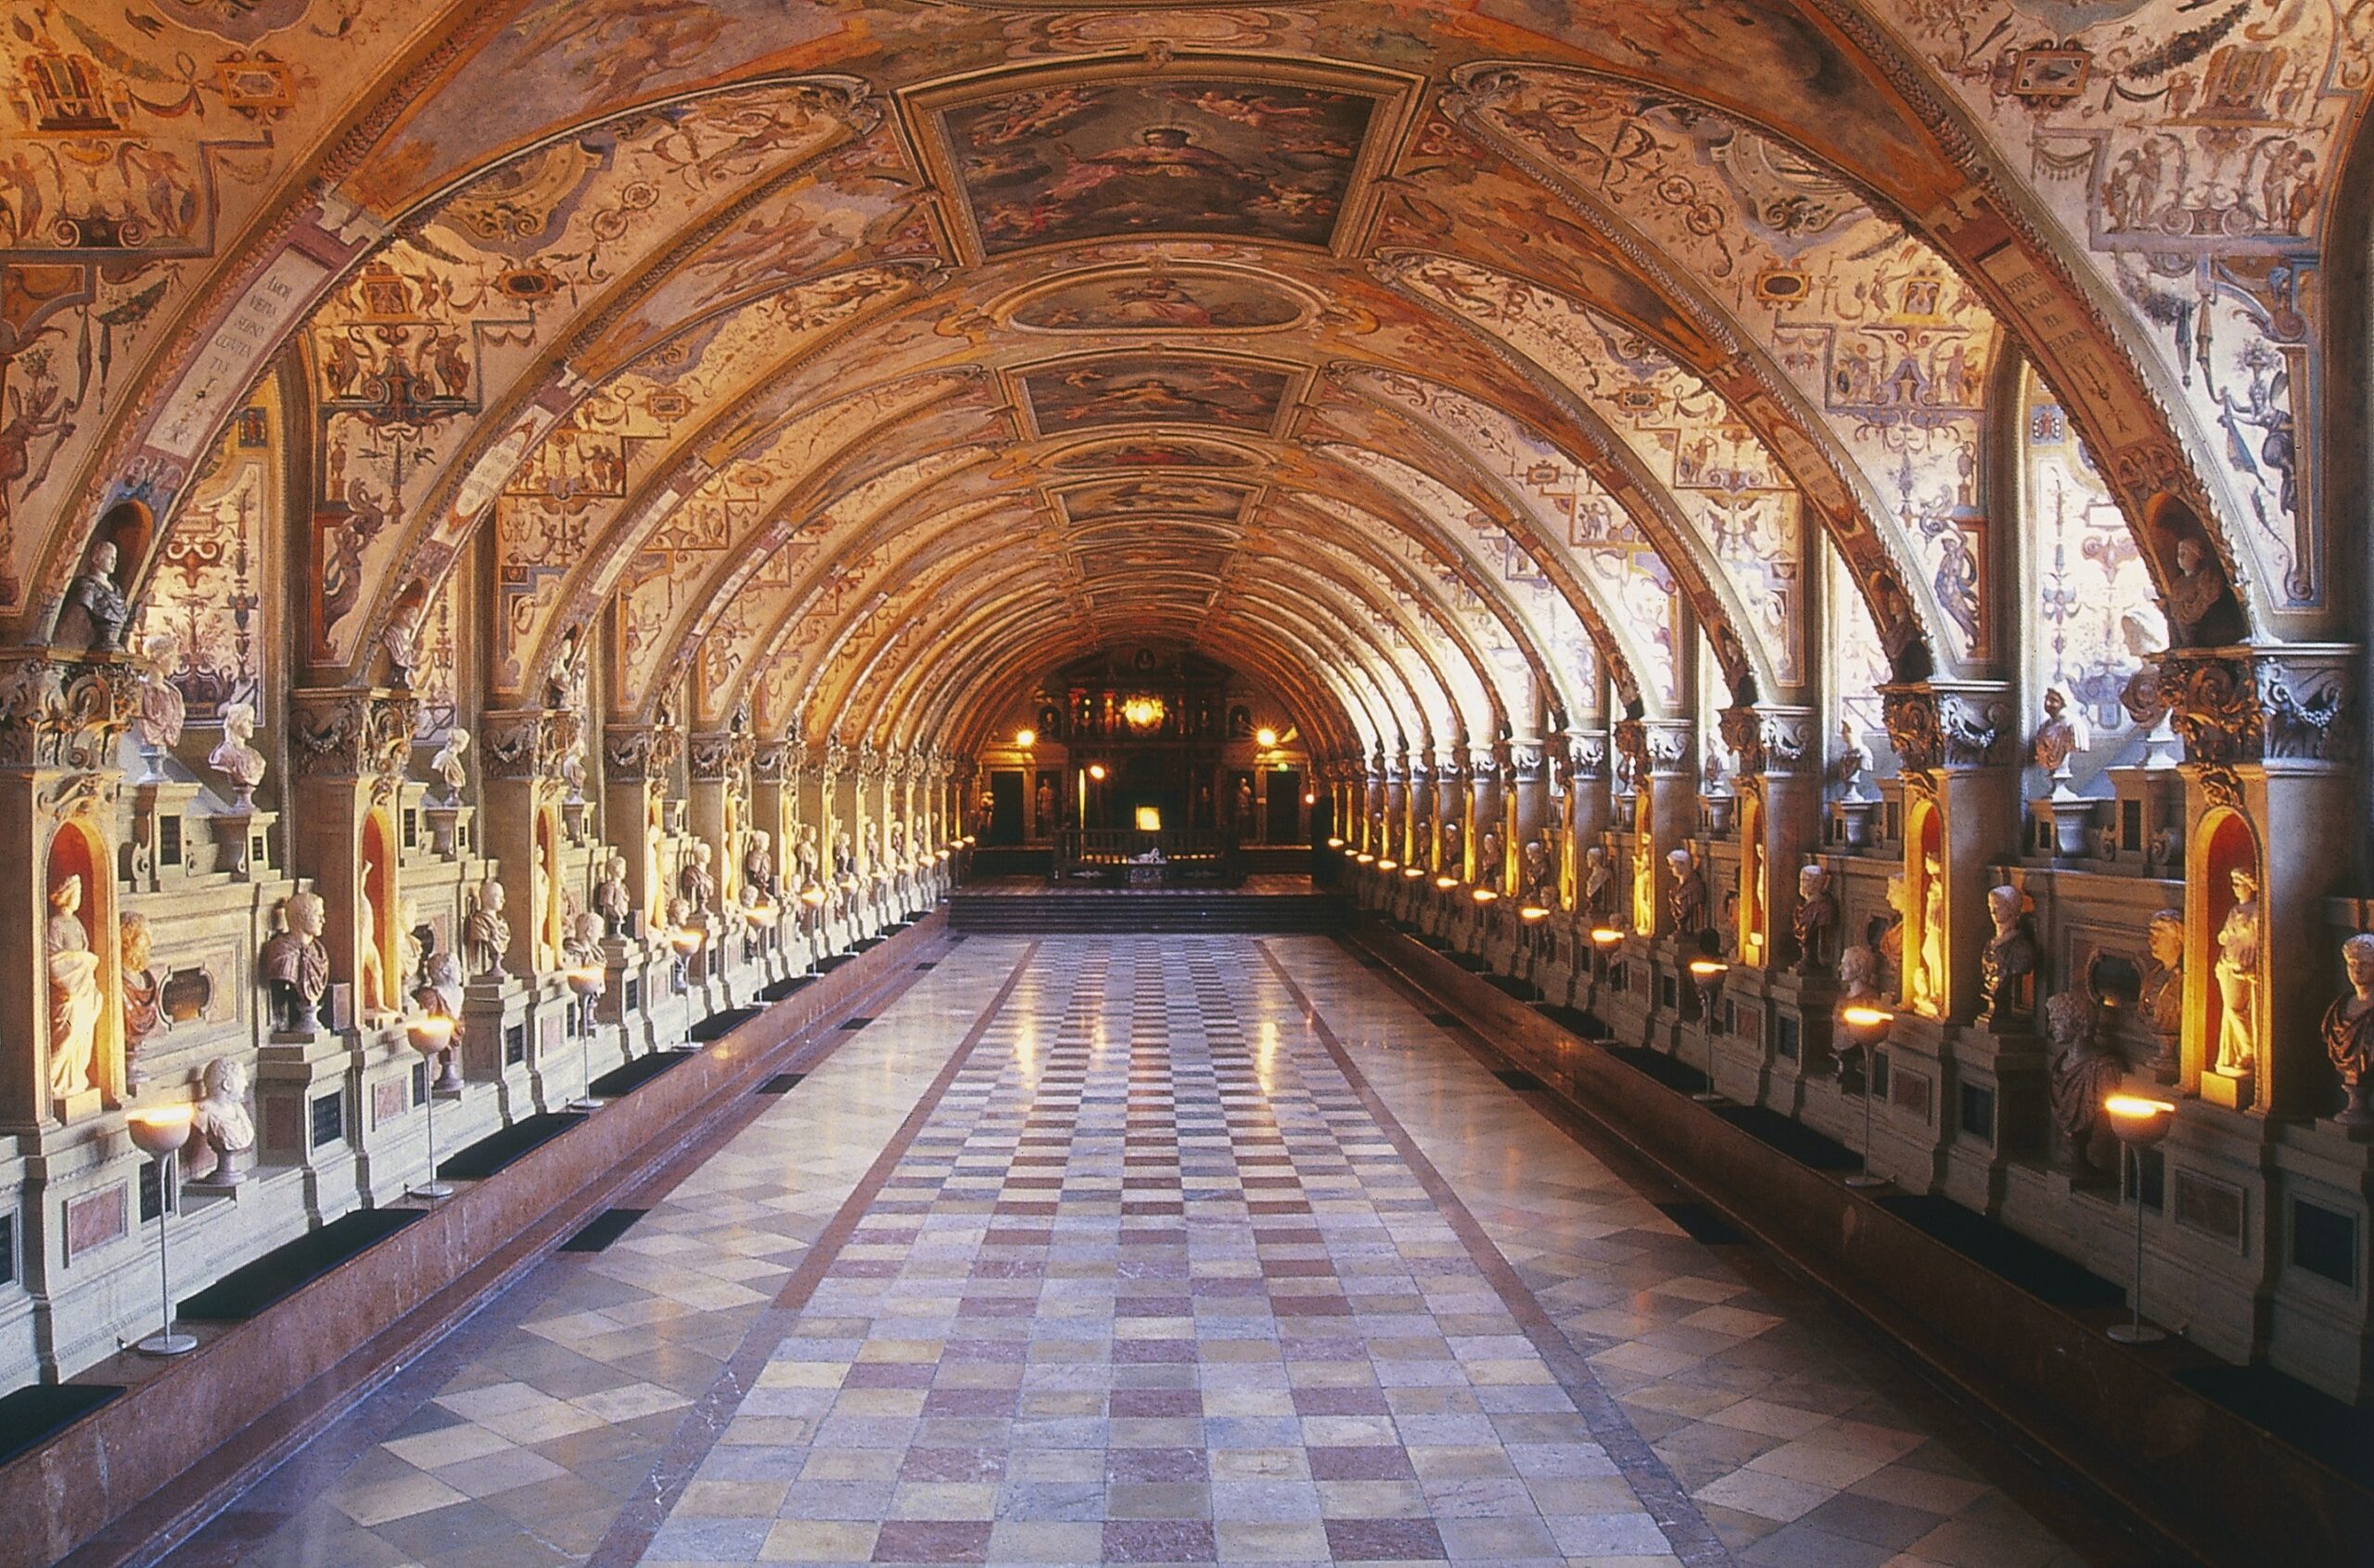 Vaulted ceiling and busts along the wall in baroque Antiquarium at the Munich Residenz in Munich, German